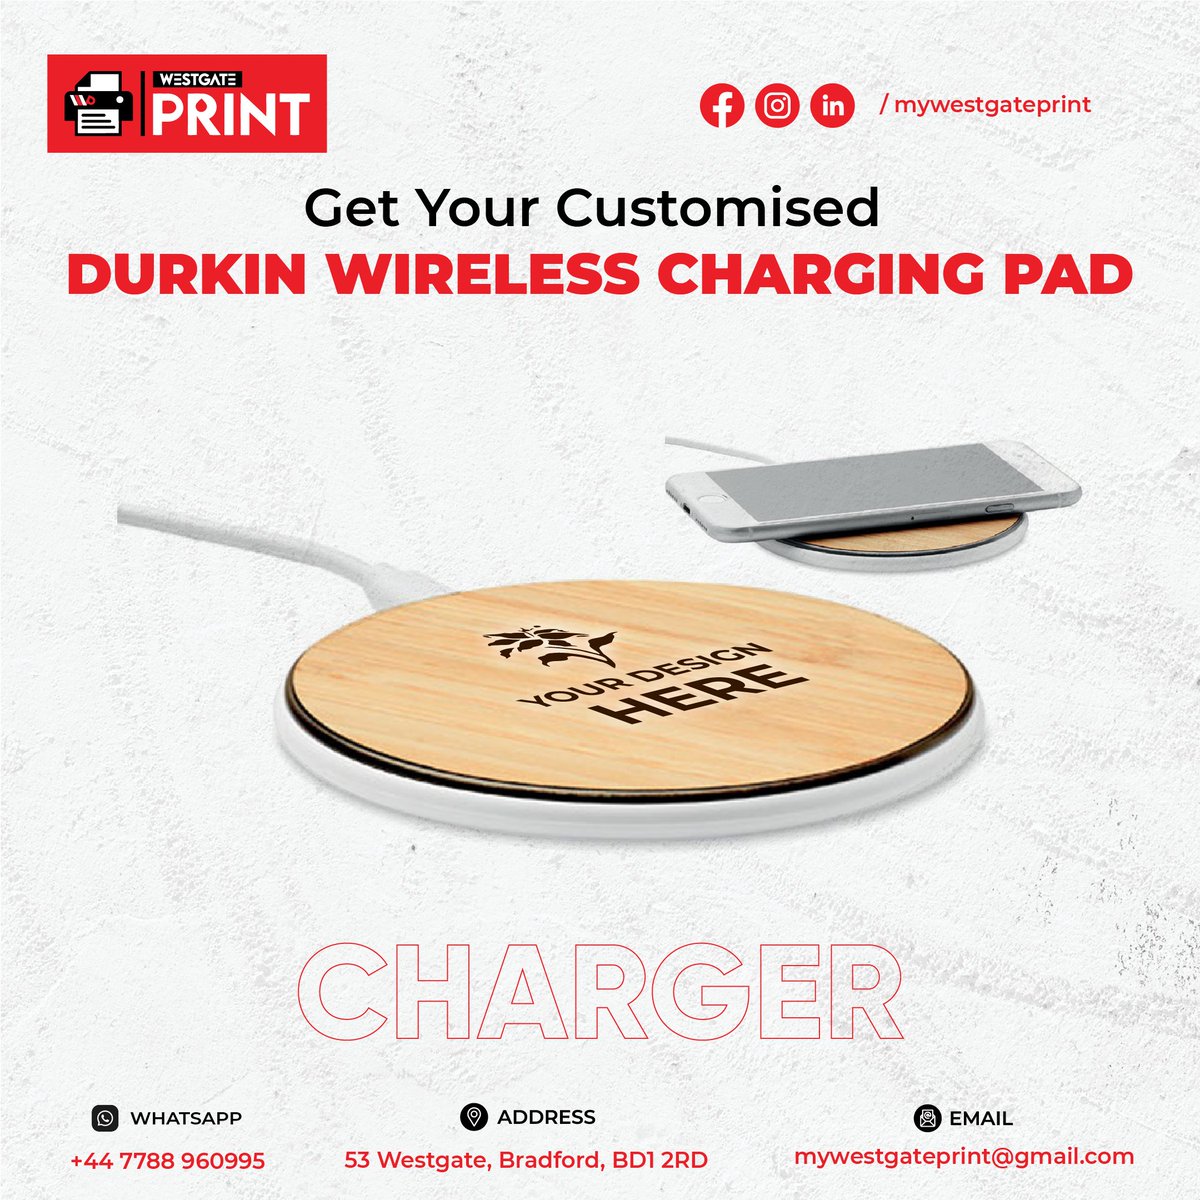 Say goodbye to tangled cables and enjoy a clutter-free charging experience. Order now!

#CustomChargingPad #WirelessCharging #ConvenientCharging #OrderNow #mailboxesetc #westgateprint_BradFord #uk #Real_WestgatePrintBradford #best_westgateprint_bradford #FastPrint_Bradford